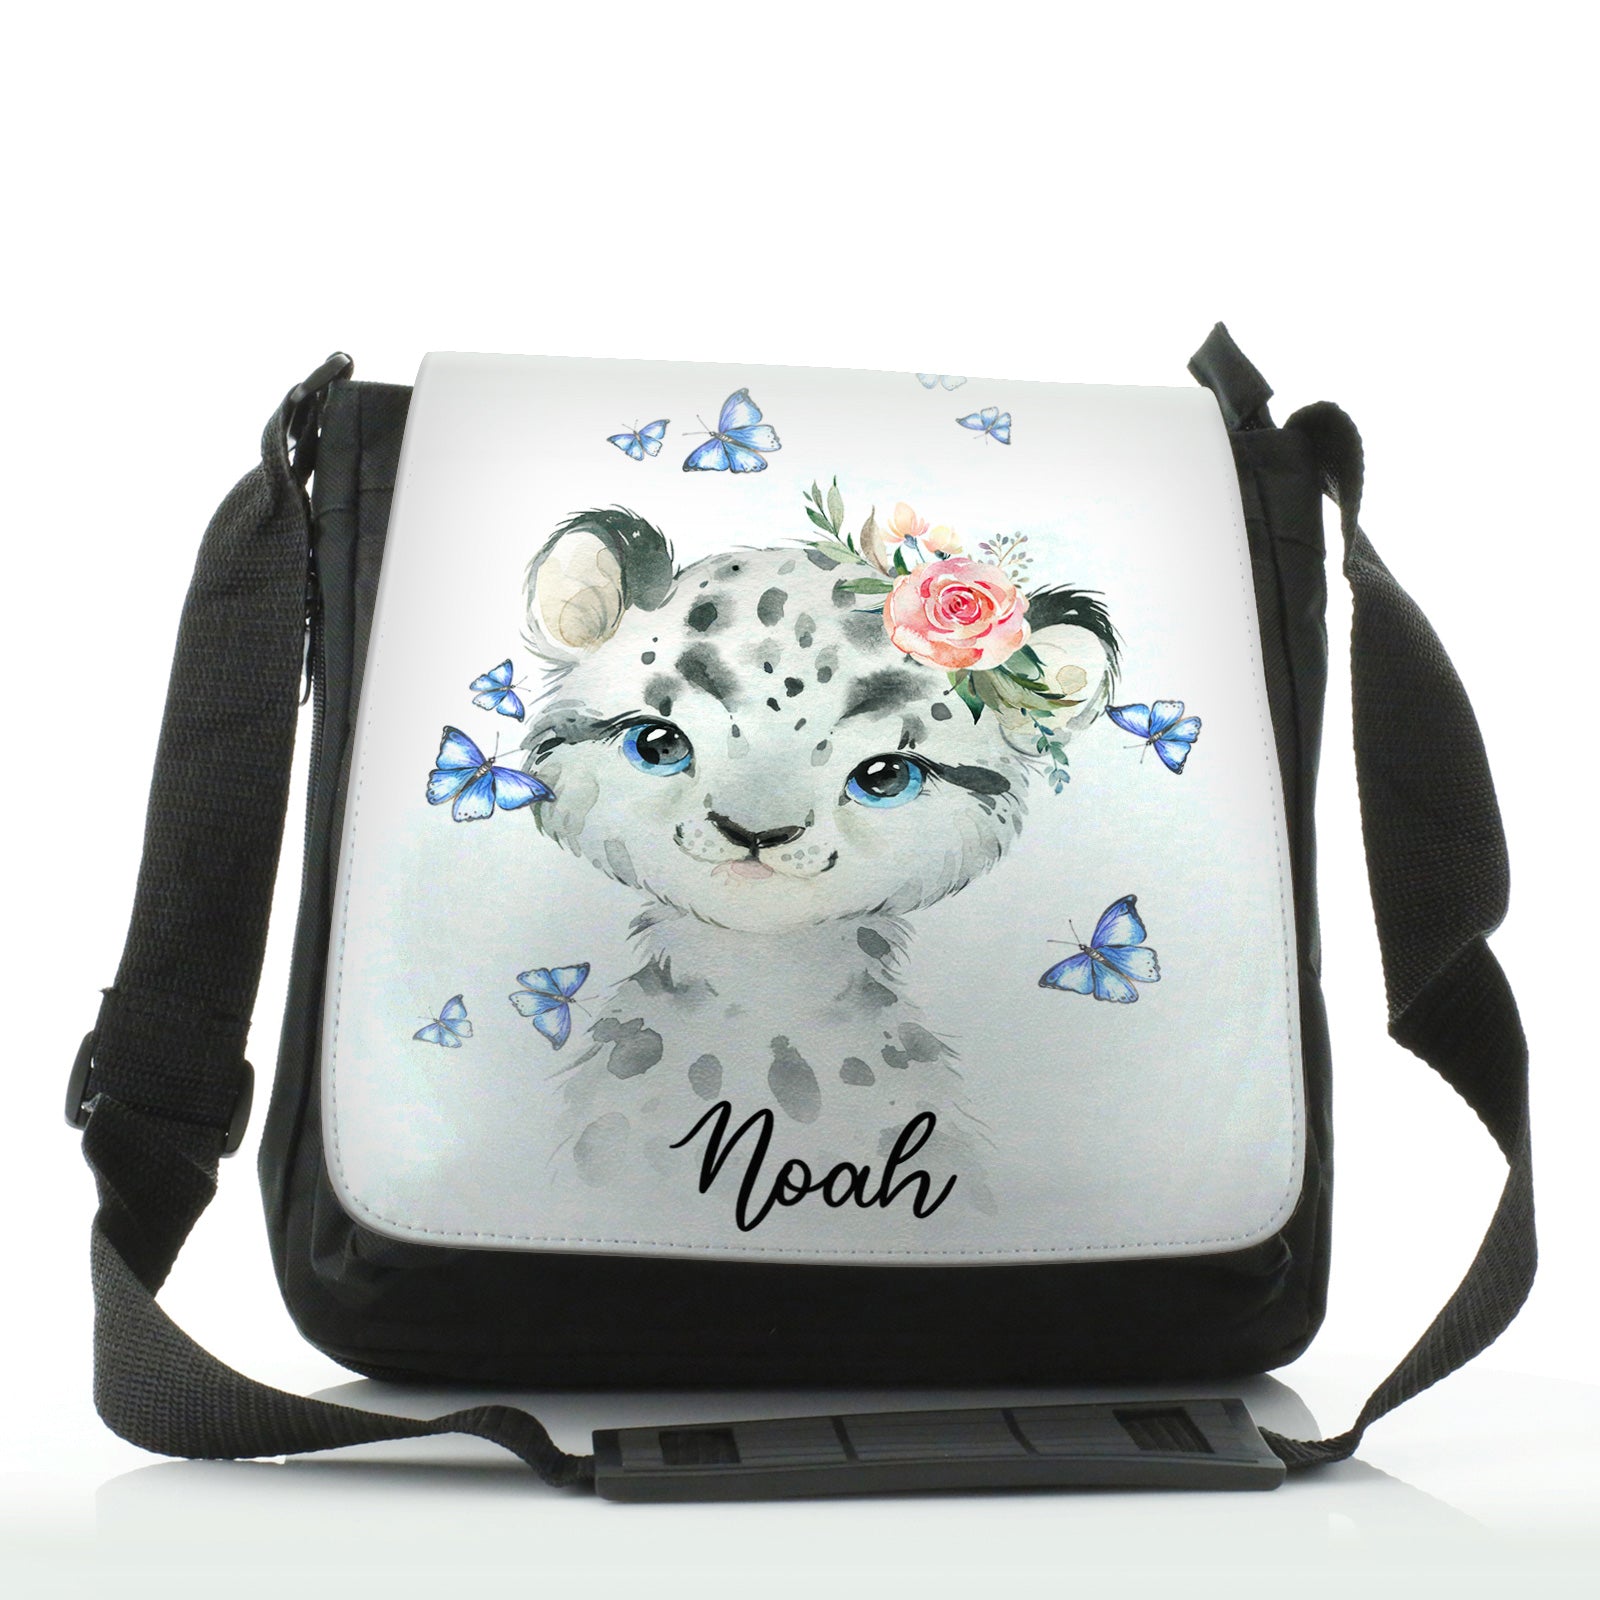 Personalised Shoulder Bag with Snow Leopard Blue Butterflies and Cute Text